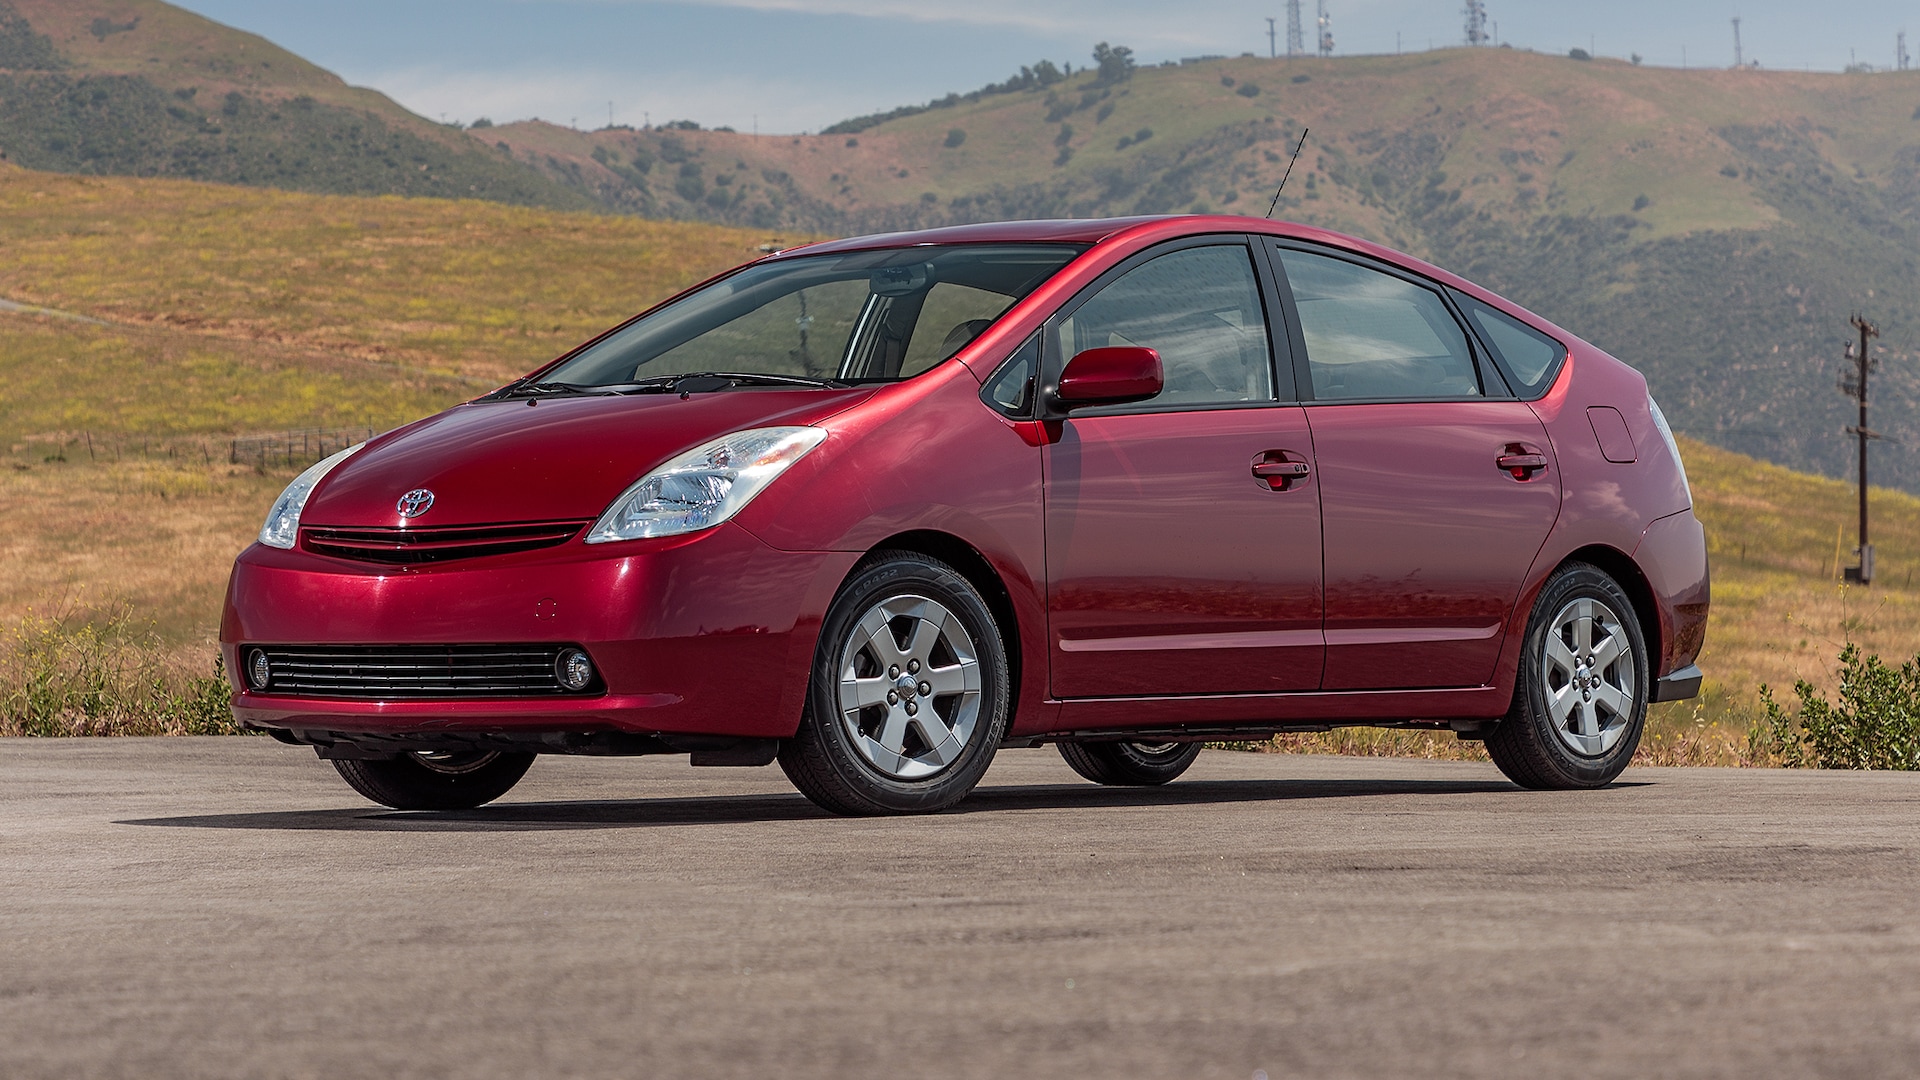 Better Than a GTO? Why the 2004 Prius Was an Excellent Car of the Year